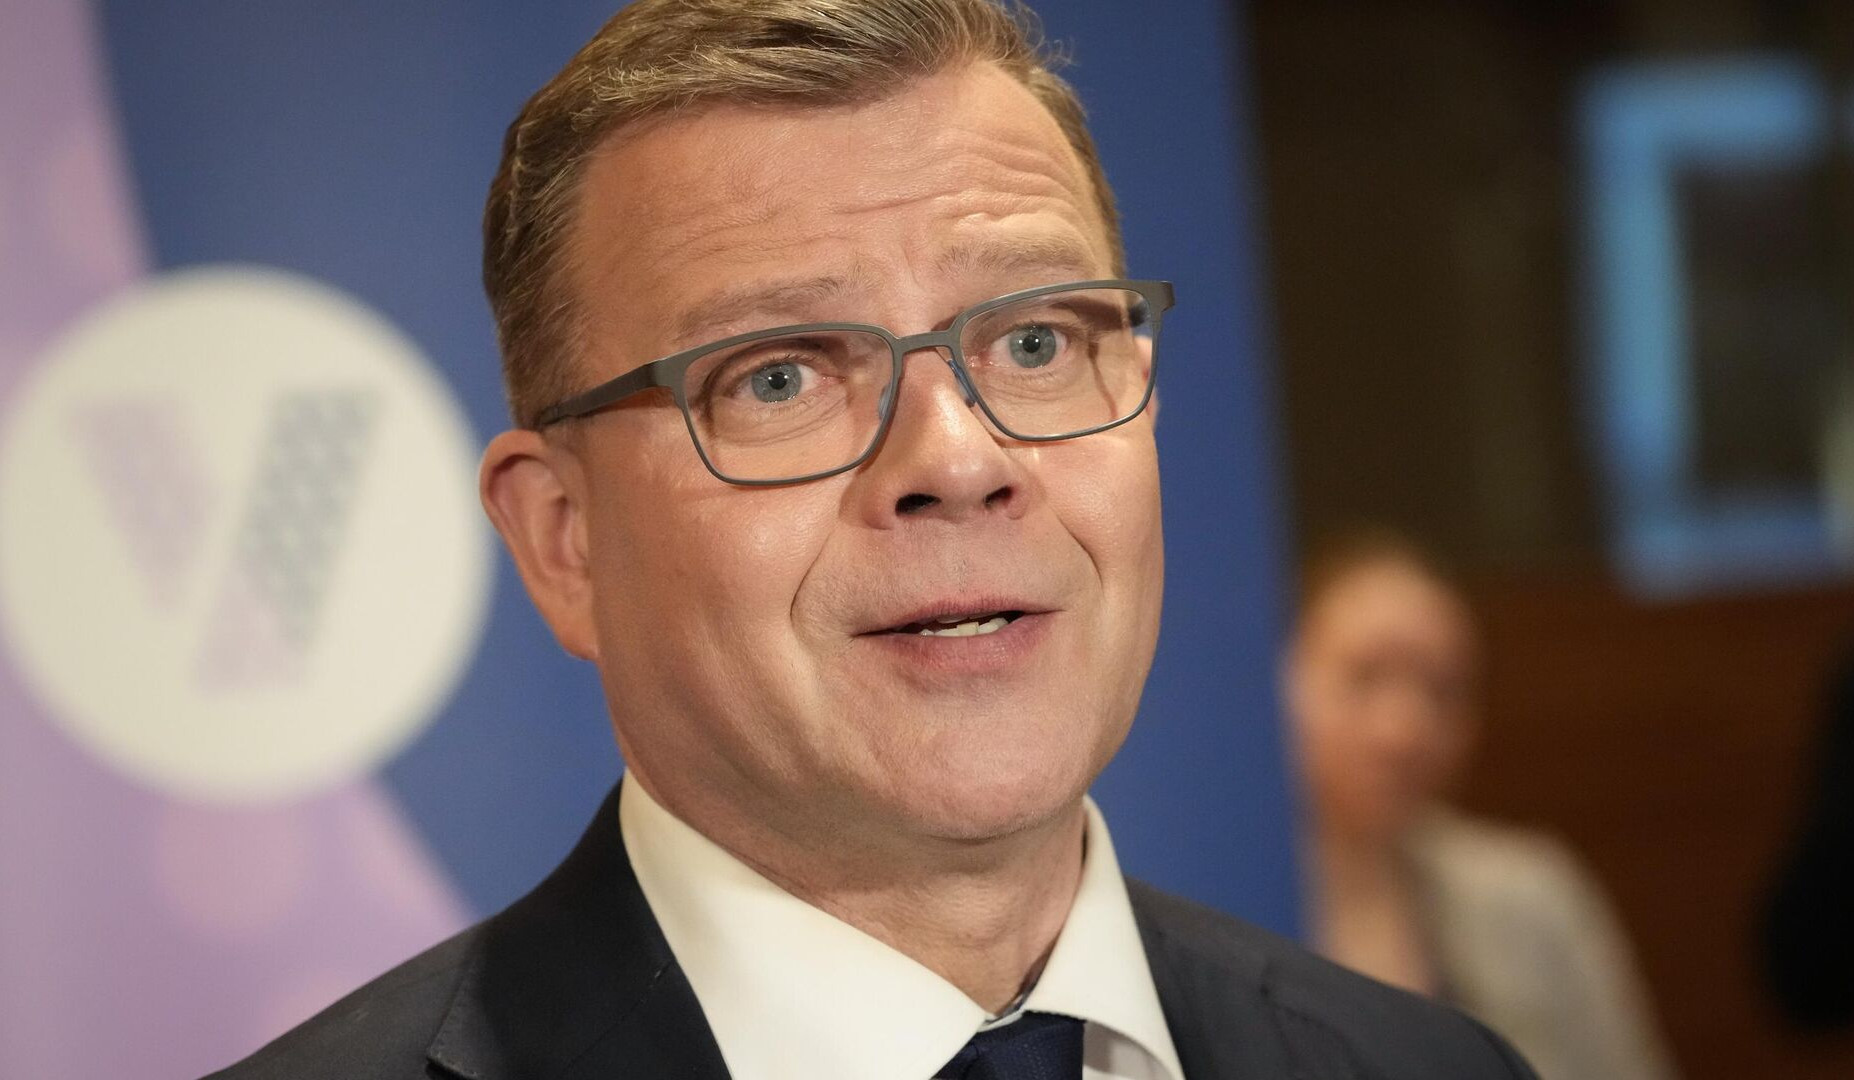 Helsinki will not open border checkpoints with Russia: Orpo